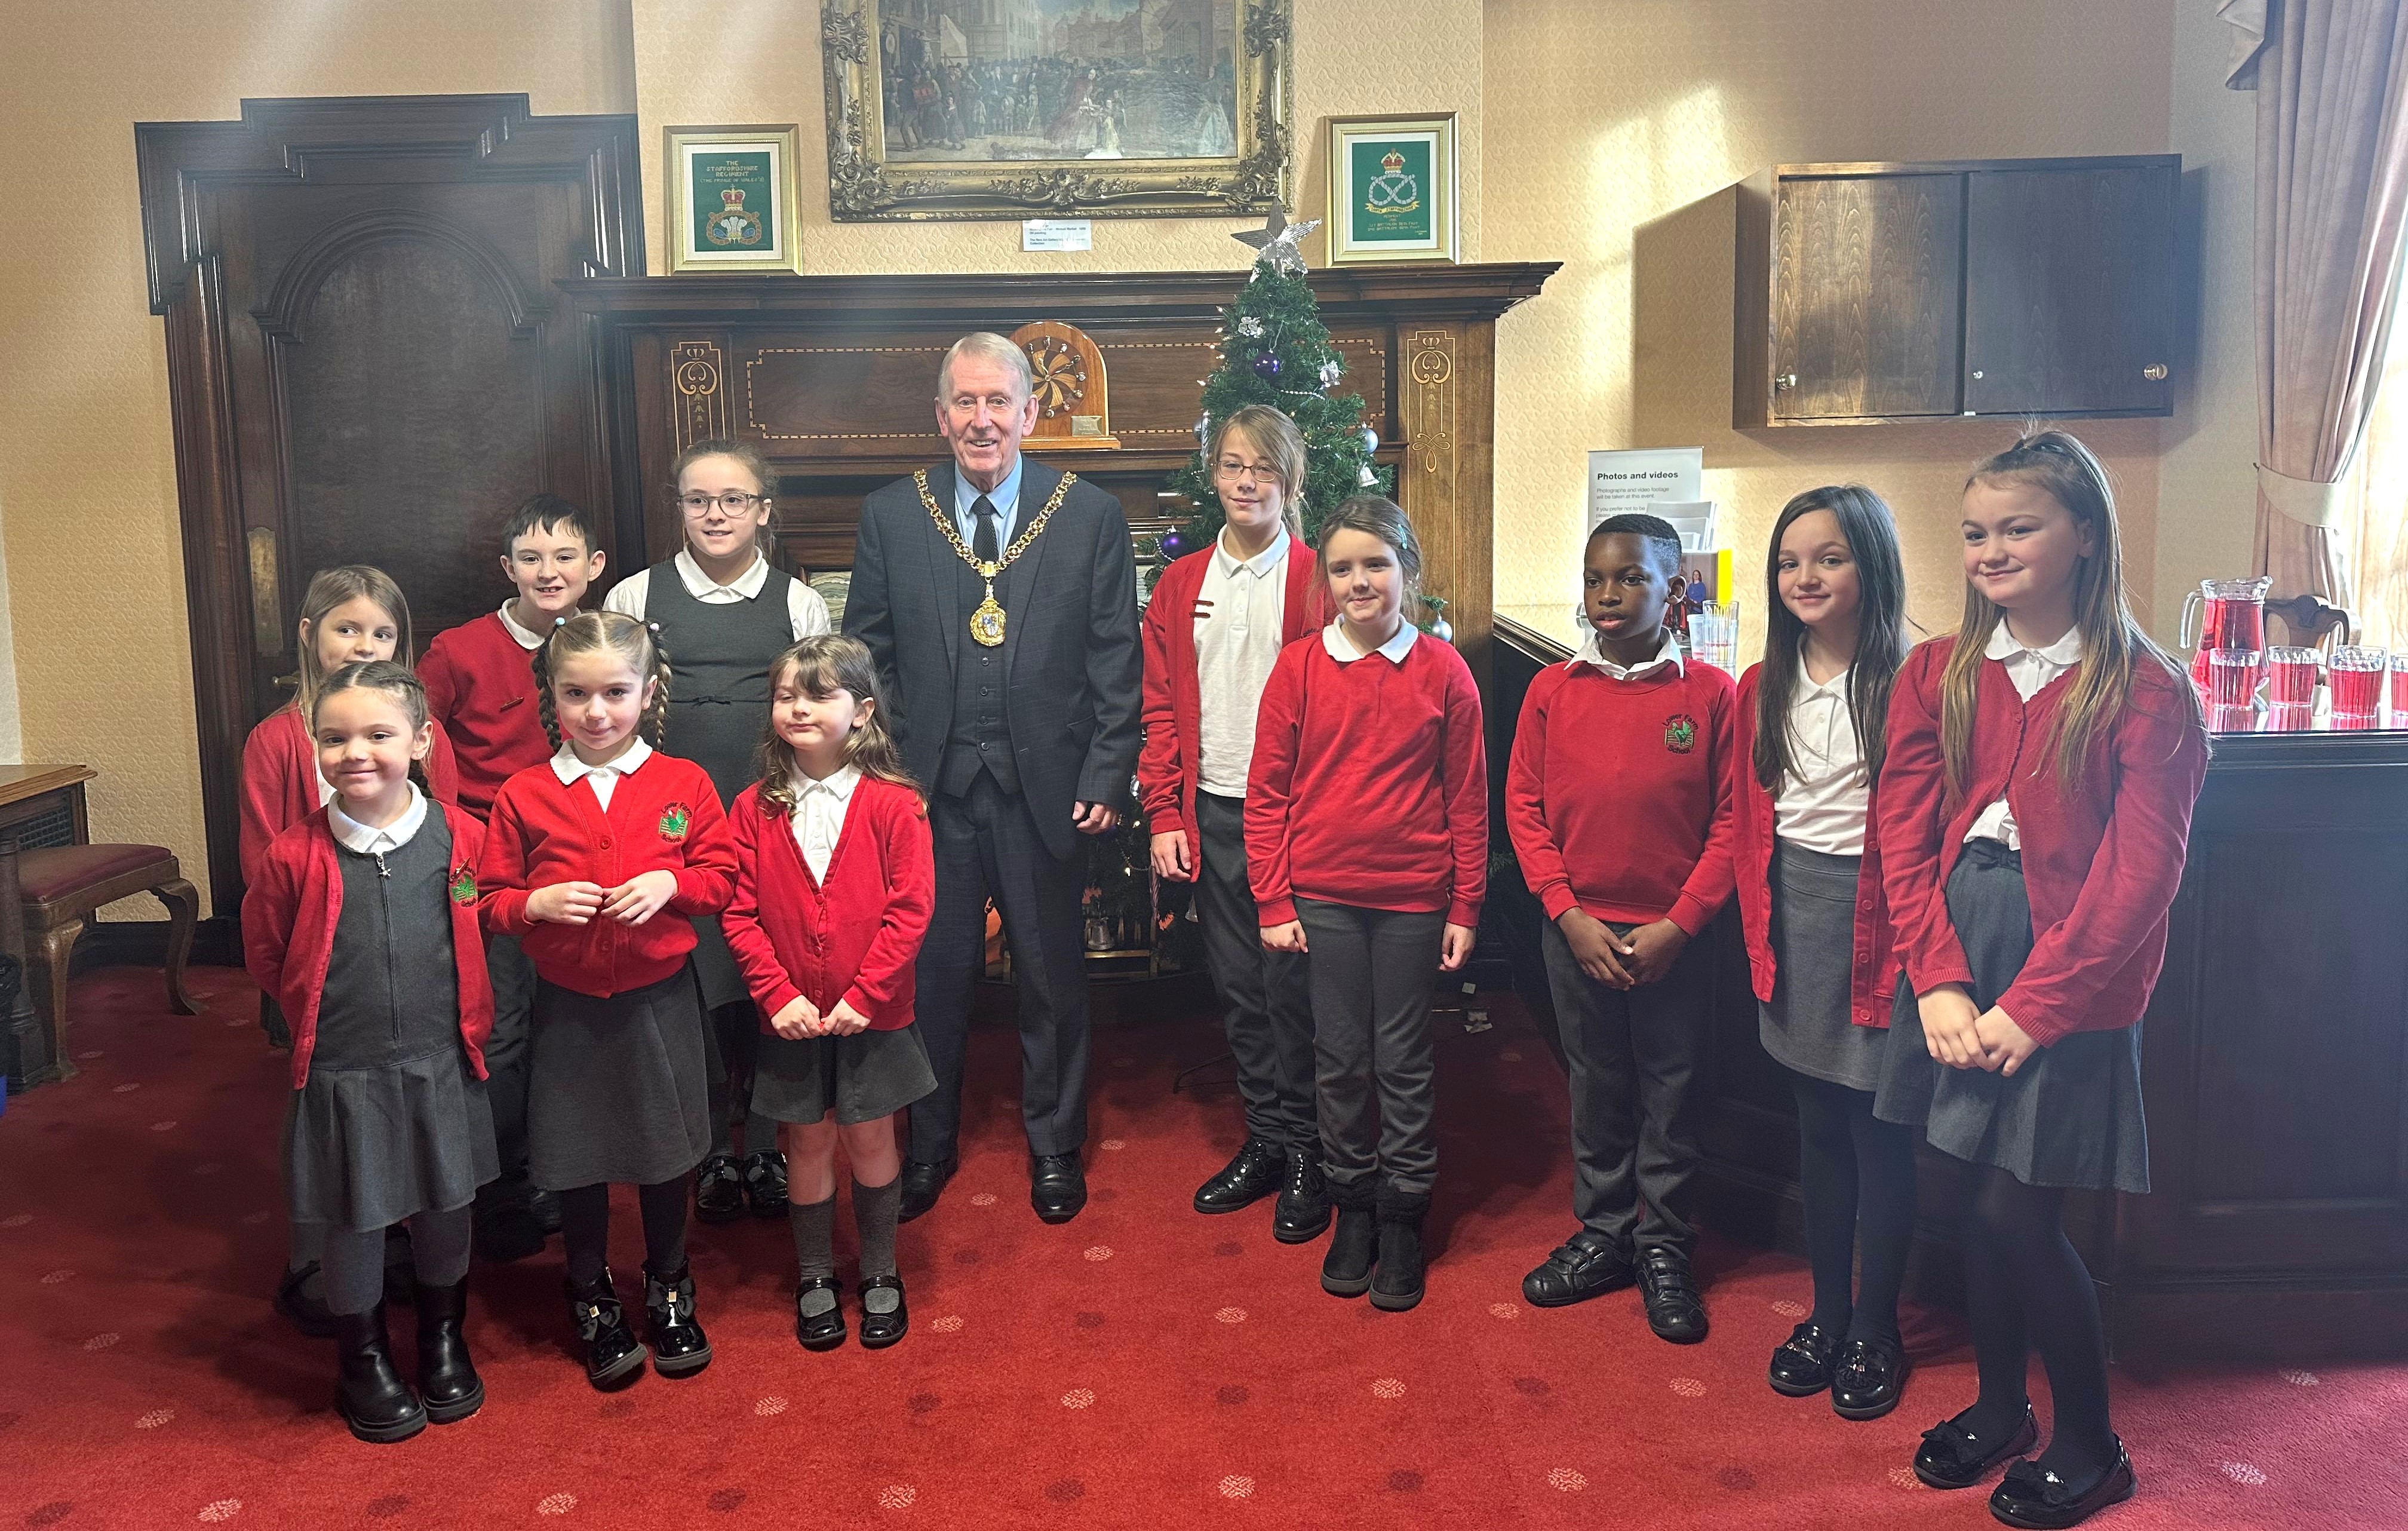 Mayor of Walsall with the children of Lower Farm Primary